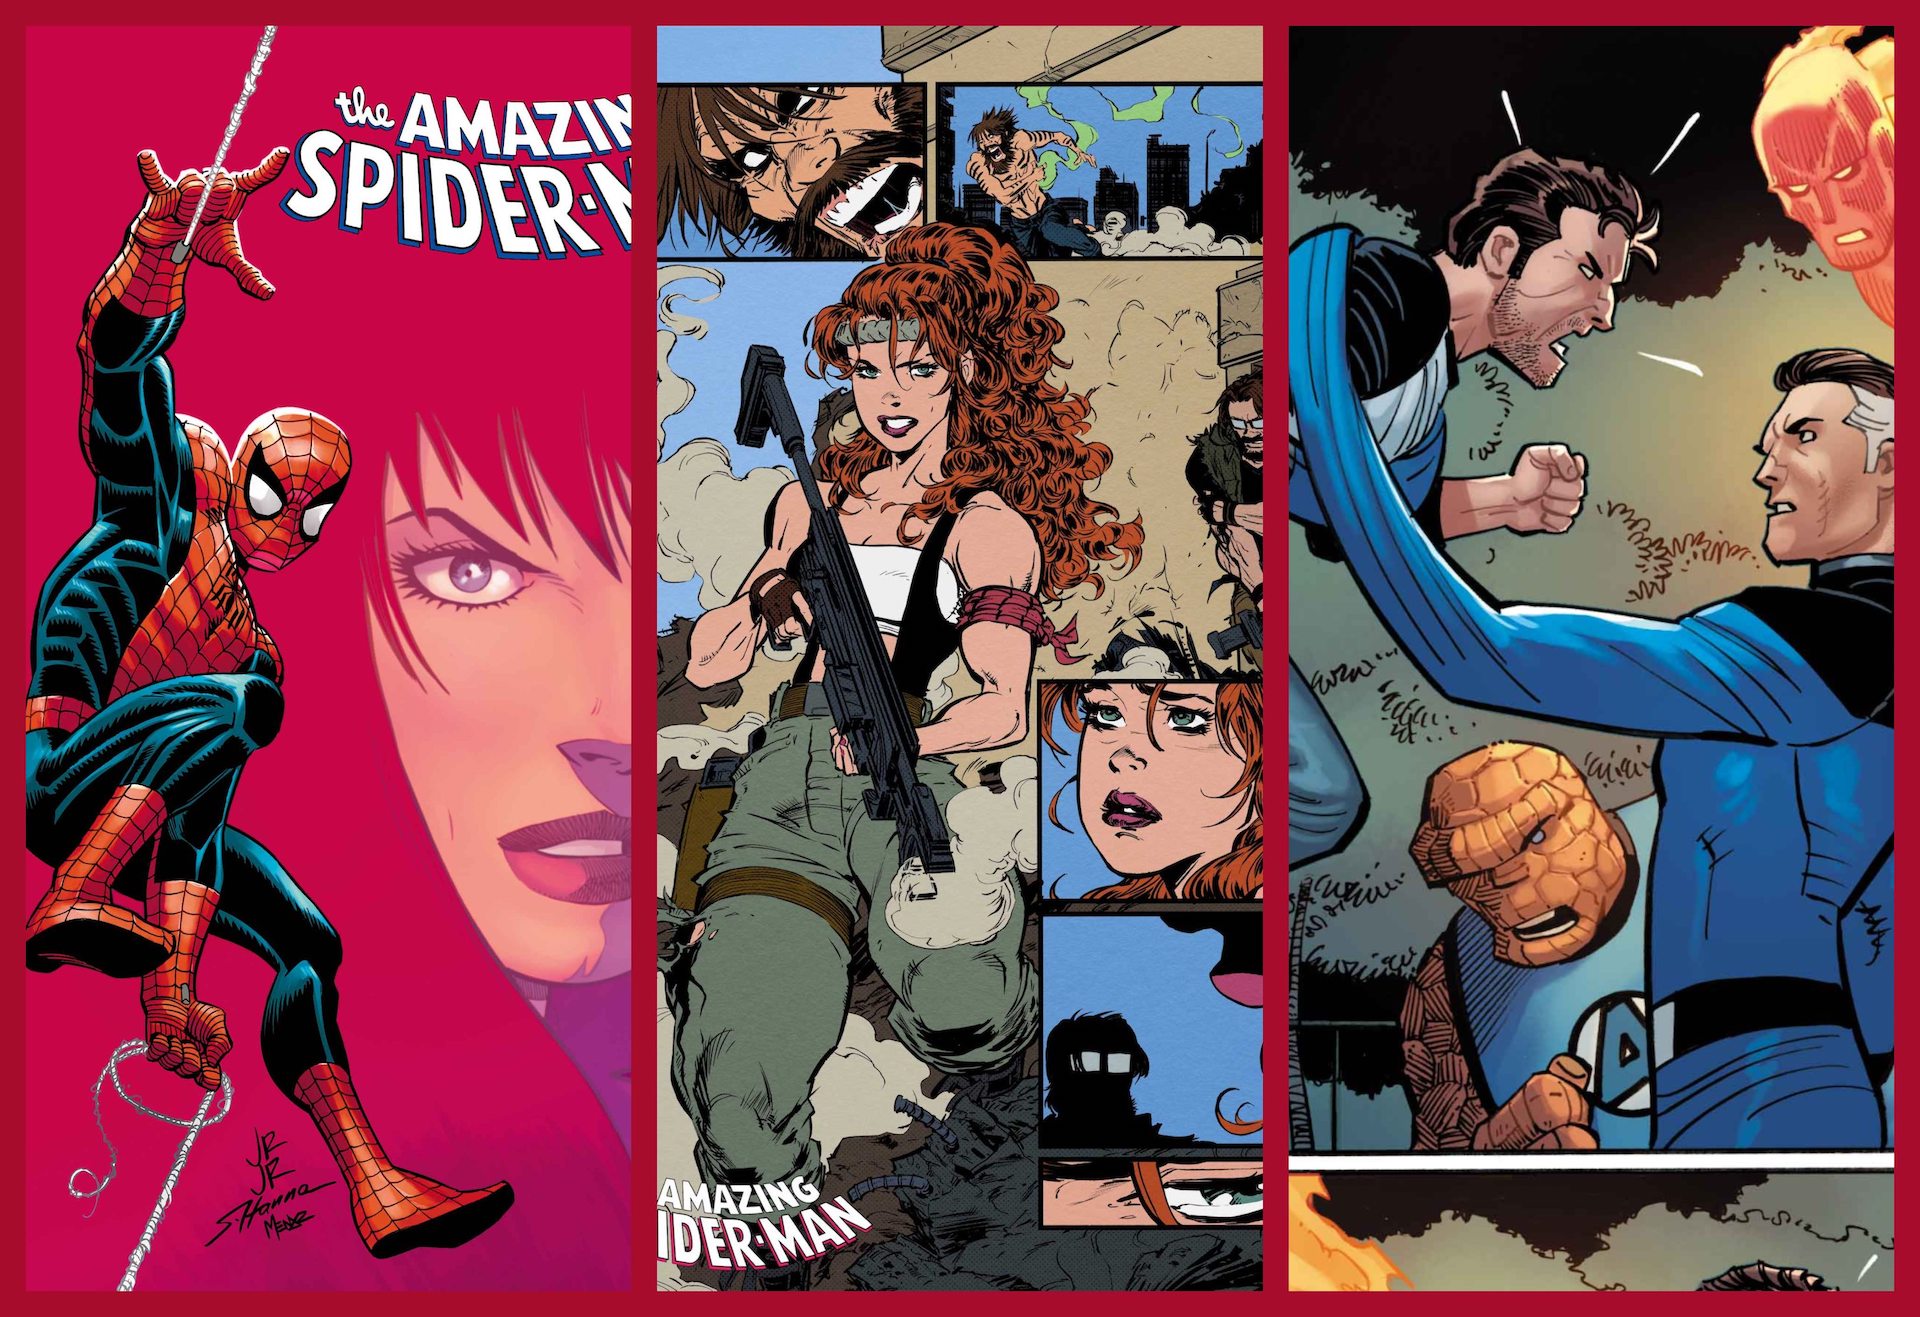 Marvel First Look: The 'heartbreaking' and 'shocking' 'Amazing Spider-Man' #25